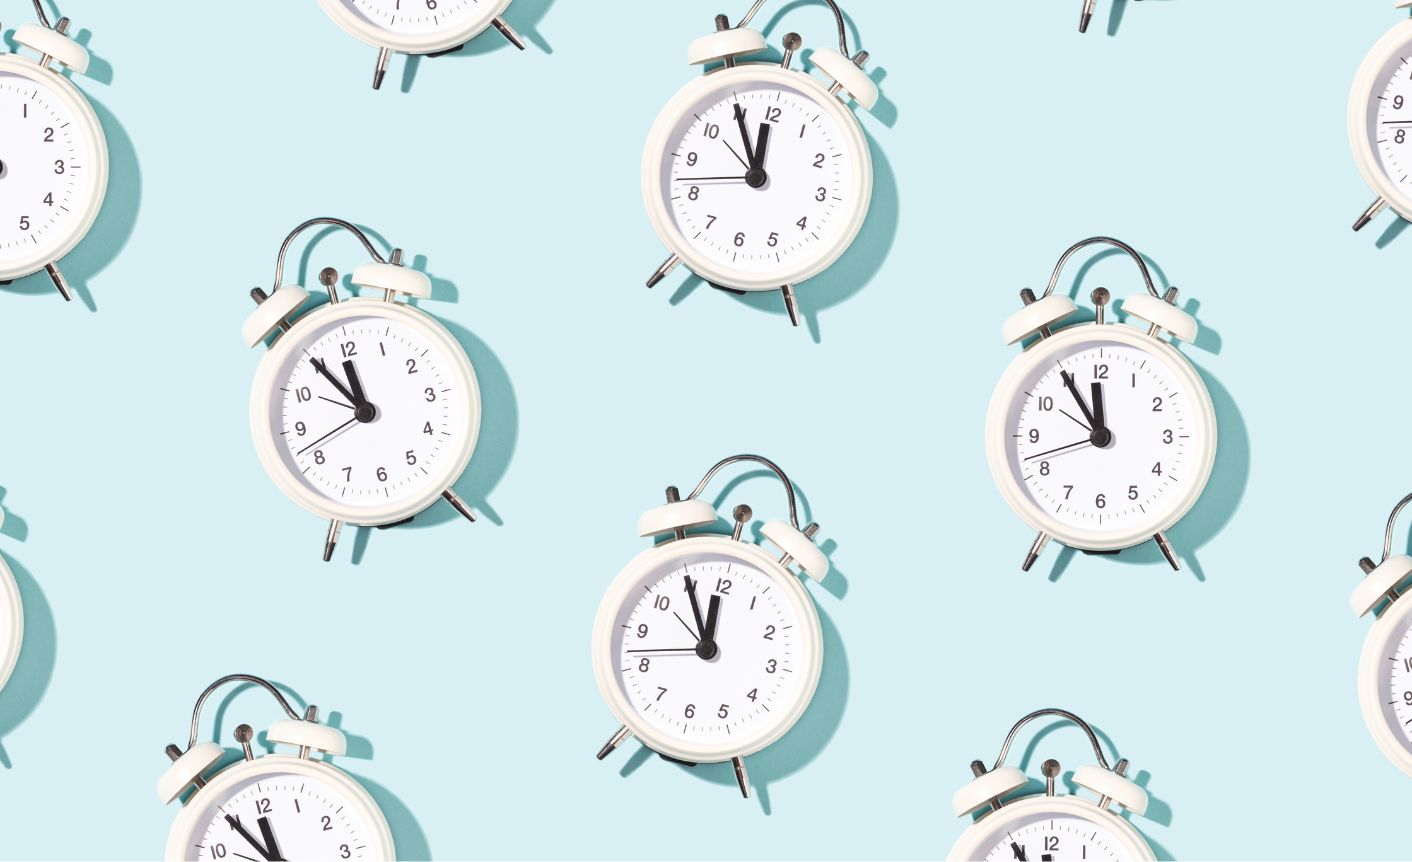 On a light blue background, lots of clocks are shown in a consistent pattern. They all show the time 11:55. They symbolize creating content faster.